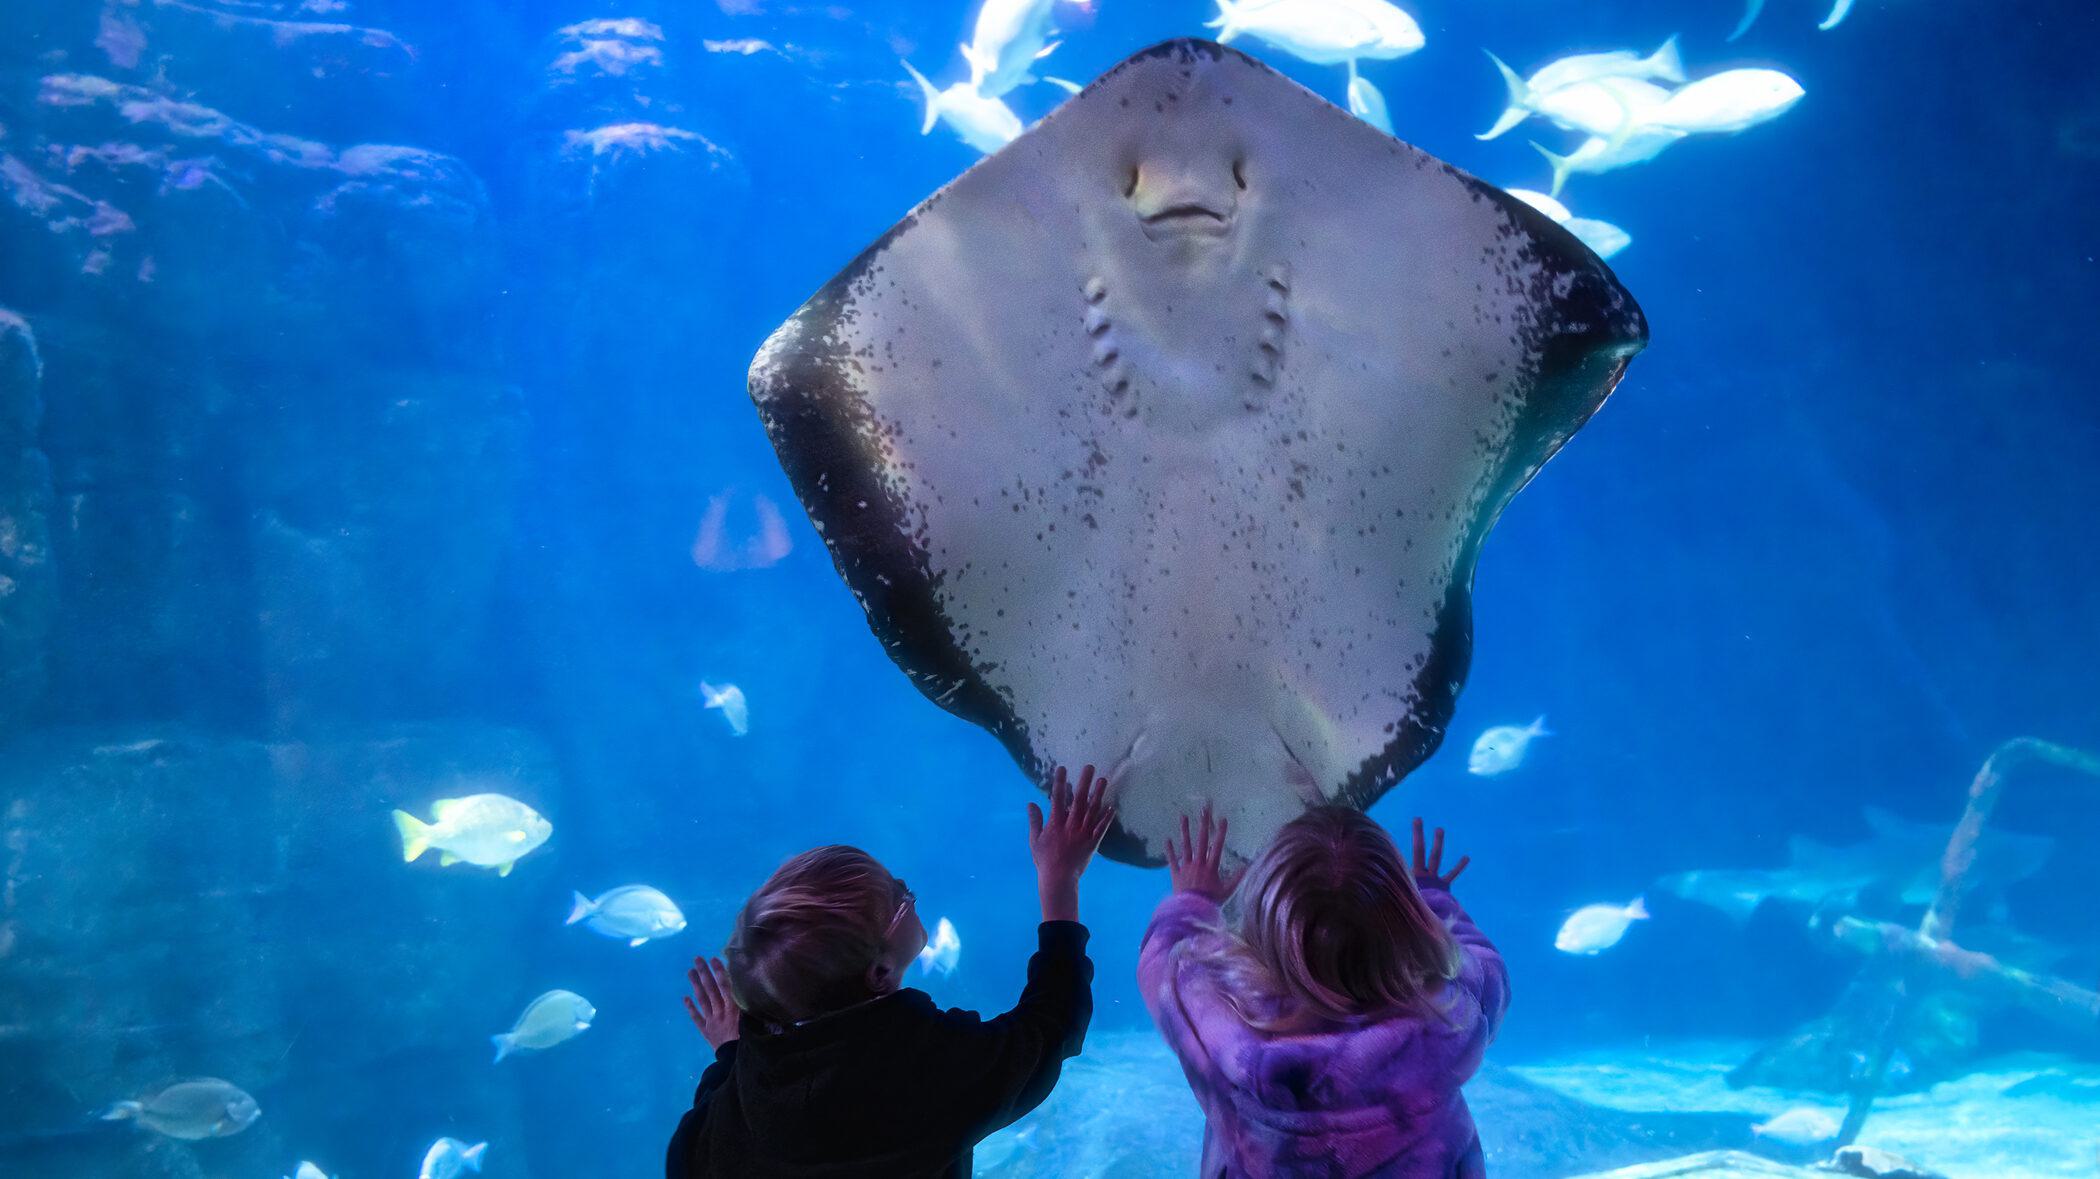 Two children lean against an exhibit window as a large stingray swims up above them from below.